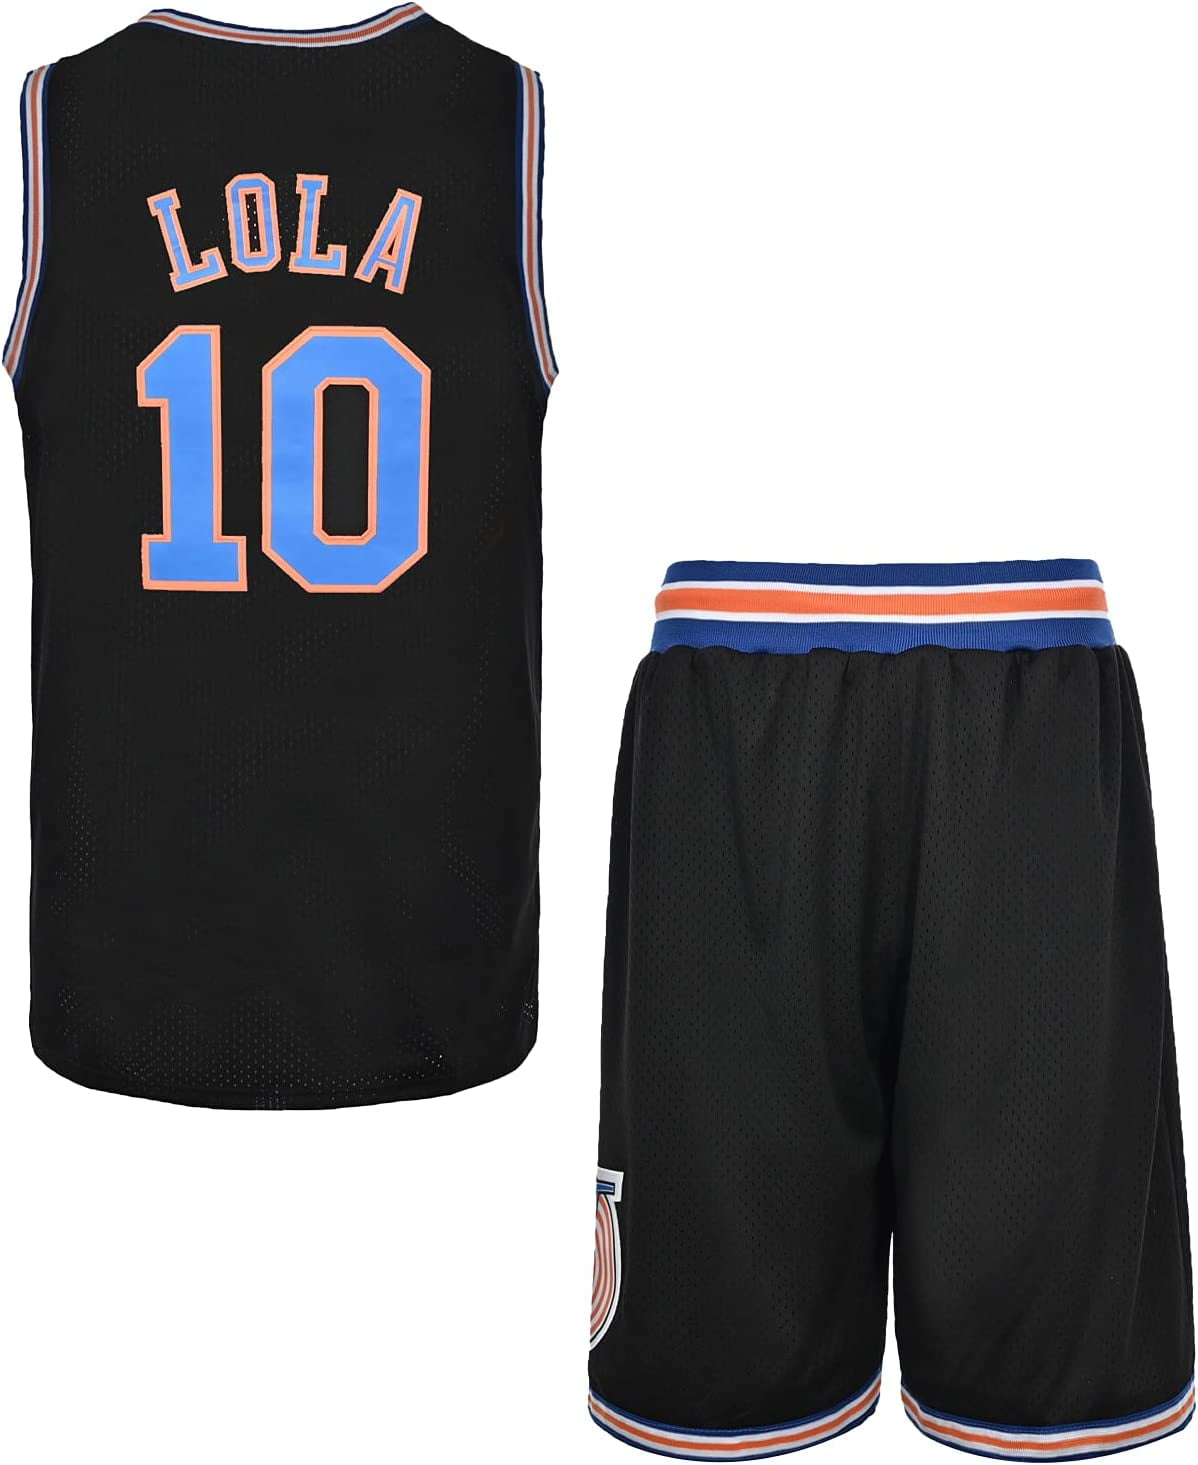 DALADOLA 10# Space Movie Boys/Girls Basketball Jersey and Pants ,Handsome,Summer!Black/White,XS-XL,5-18Y!Basketball Suit. 